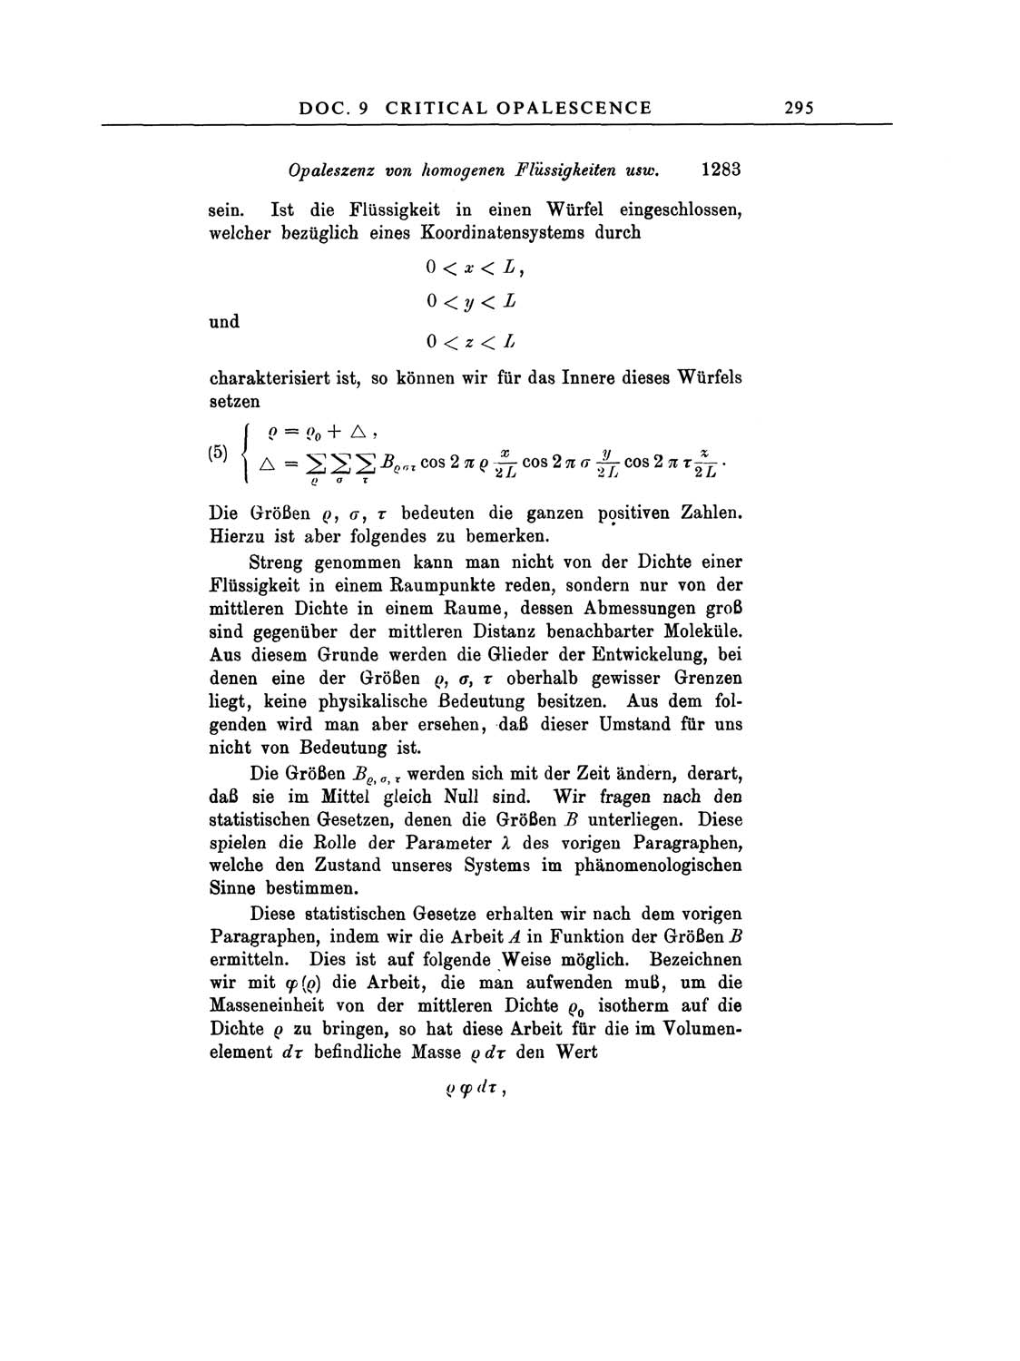 Volume 3: The Swiss Years: Writings 1909-1911 page 295